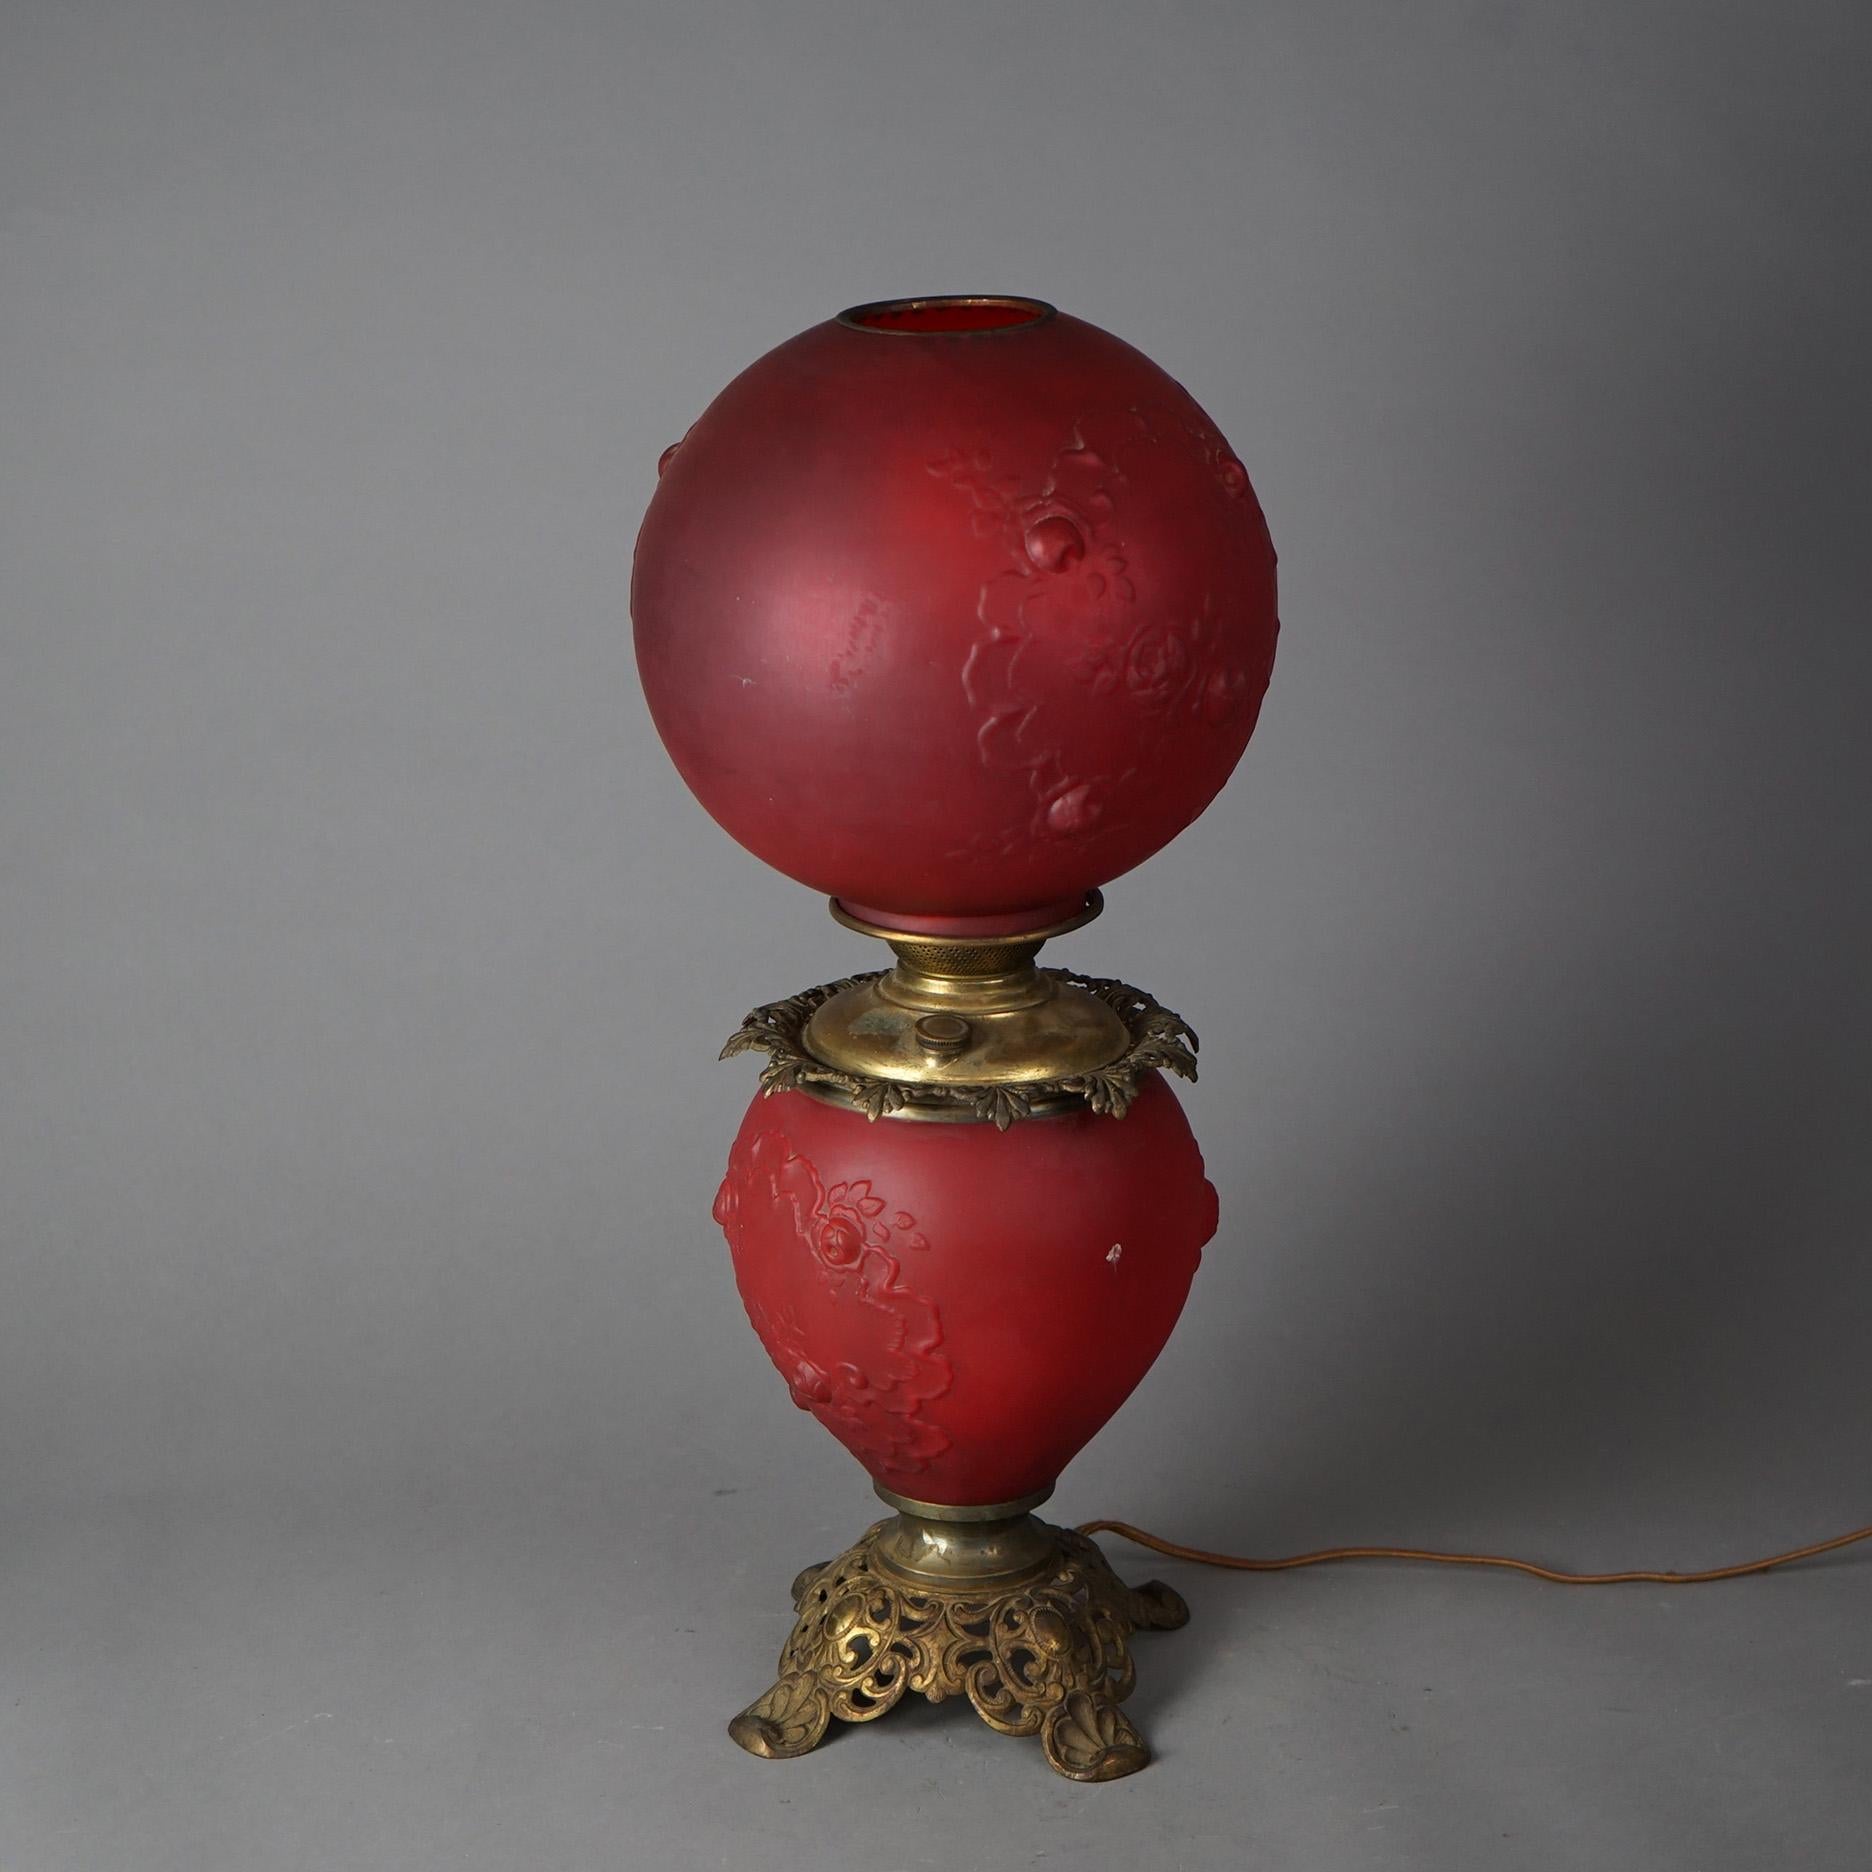 American Antique Brass & Cranberry Glass Gone With The Wind Floral Embossed Lamp c1890 For Sale